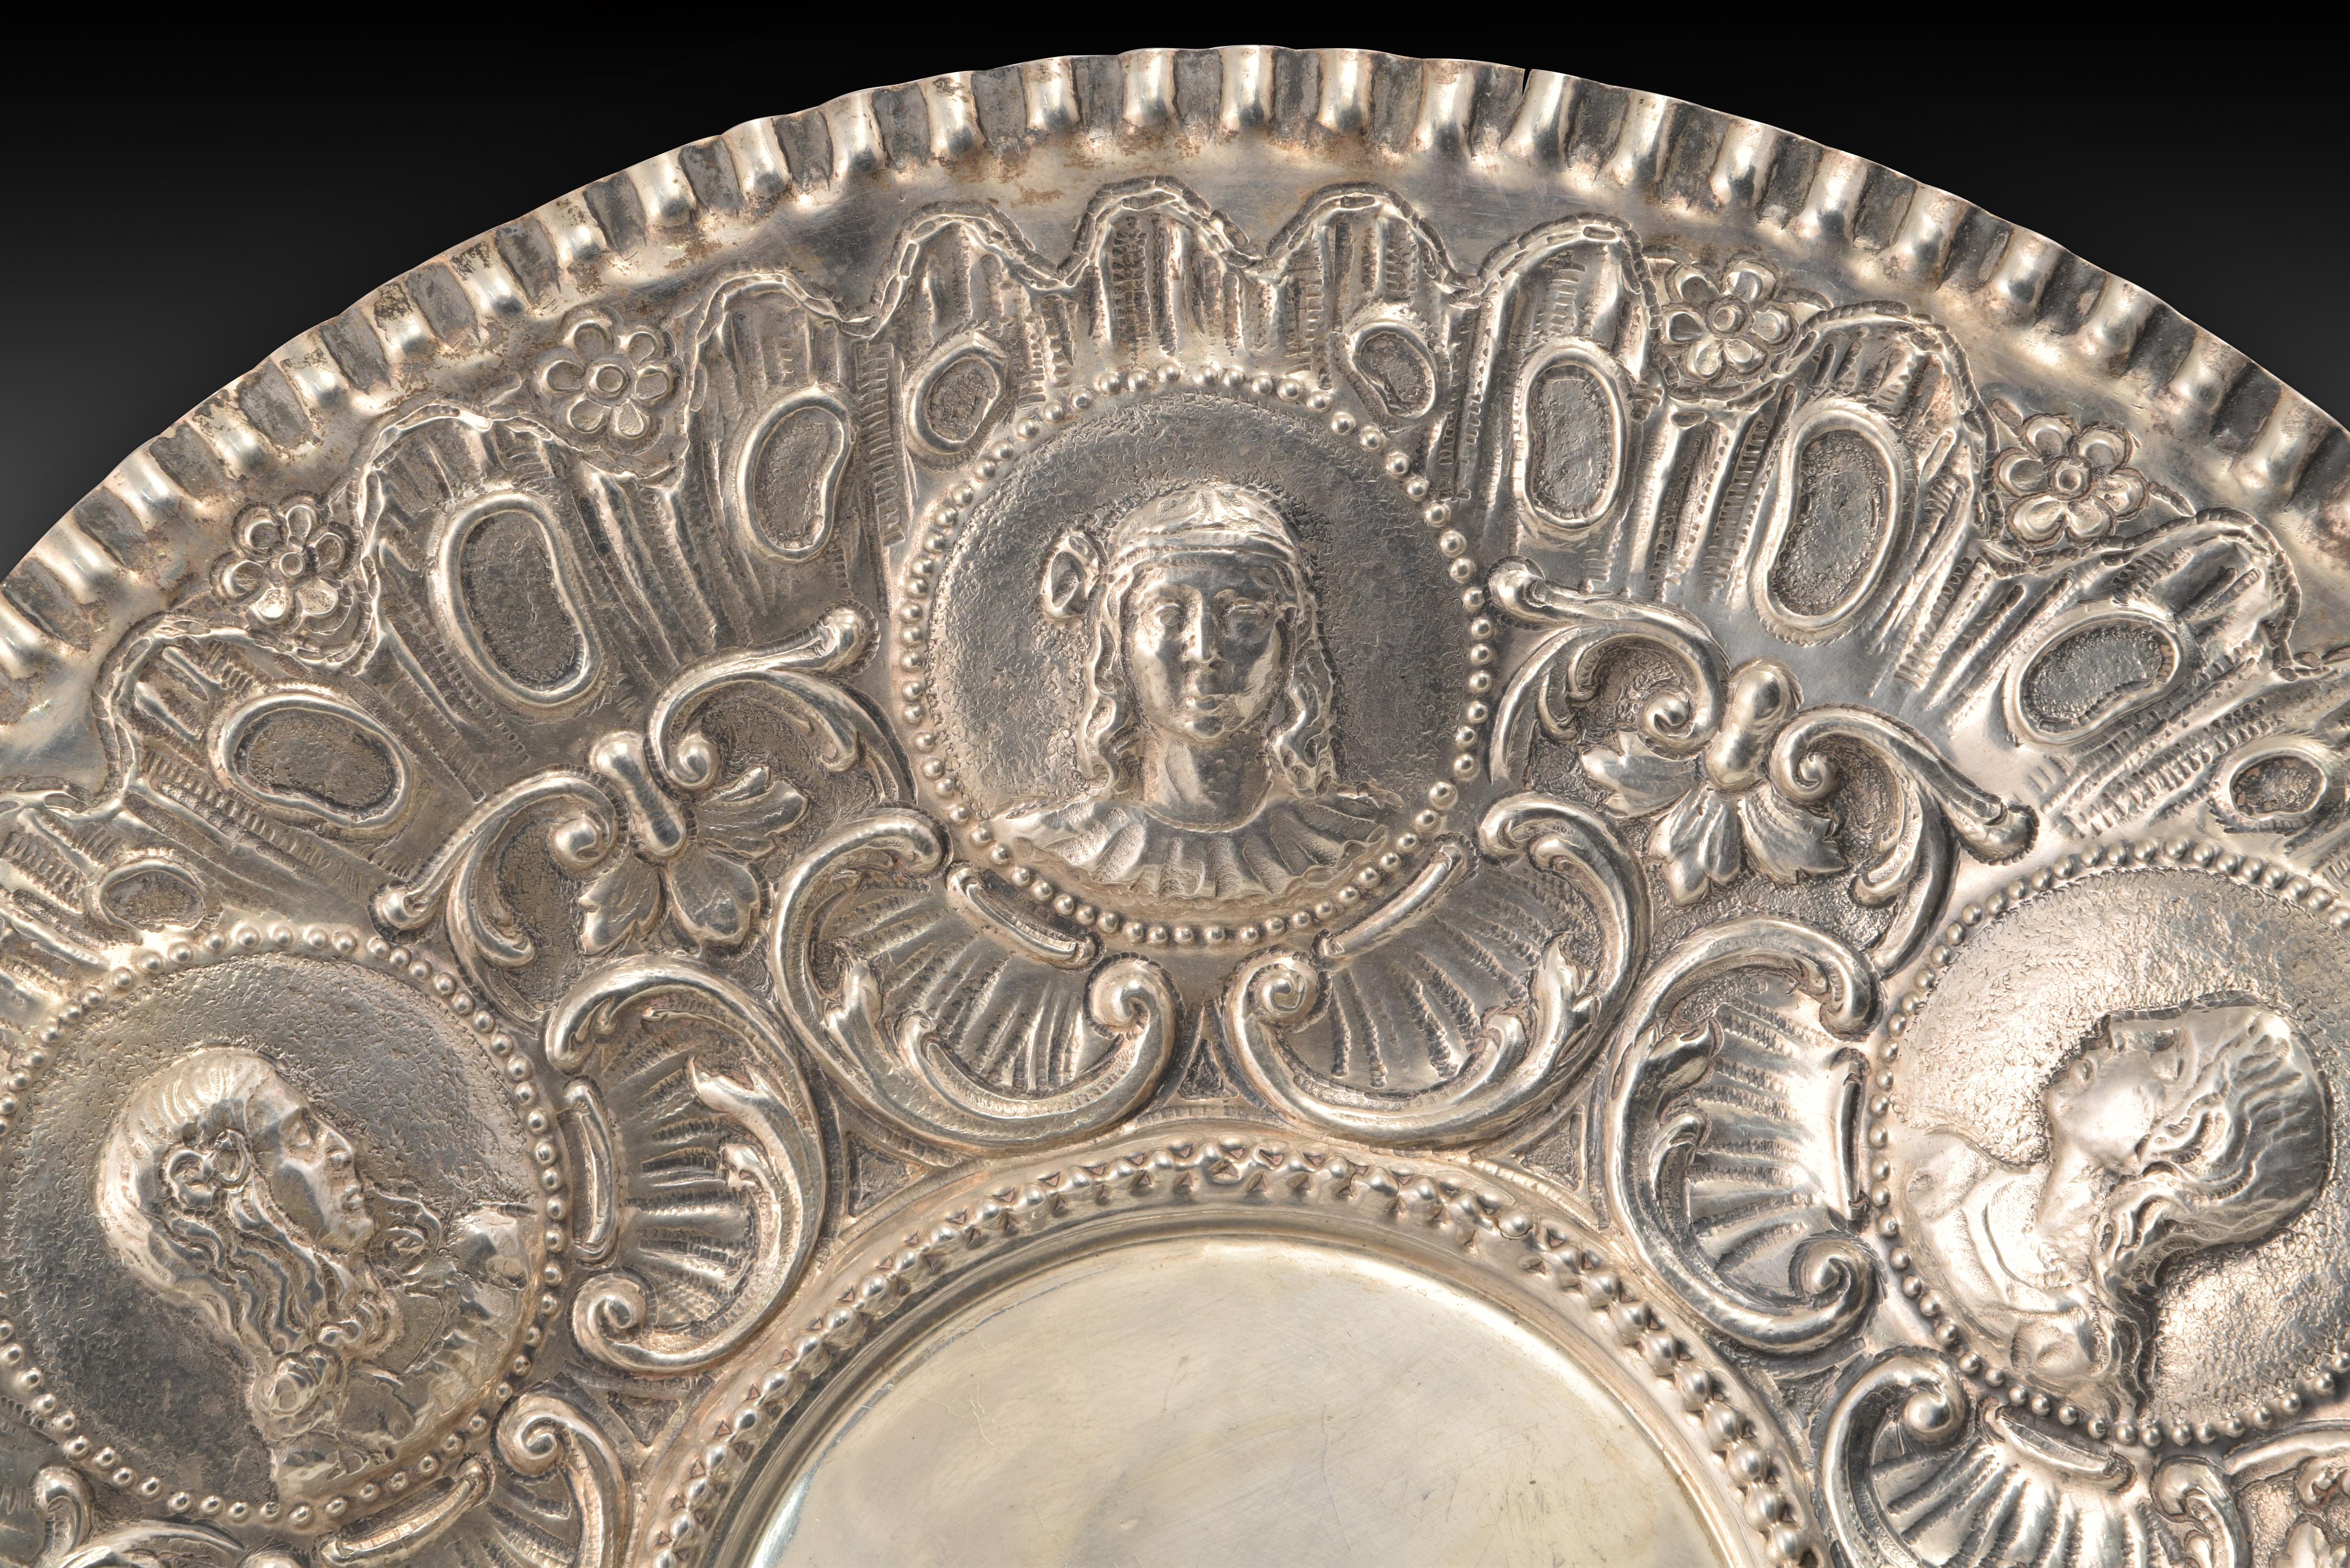 Circular silver tray embossed in its color, circular and decorated on the edge with a series of busts inside pearl strings, accompanied by scrolls, plant elements and motifs of clear Rococo memory, which has a jagged edge to the outside. The piece